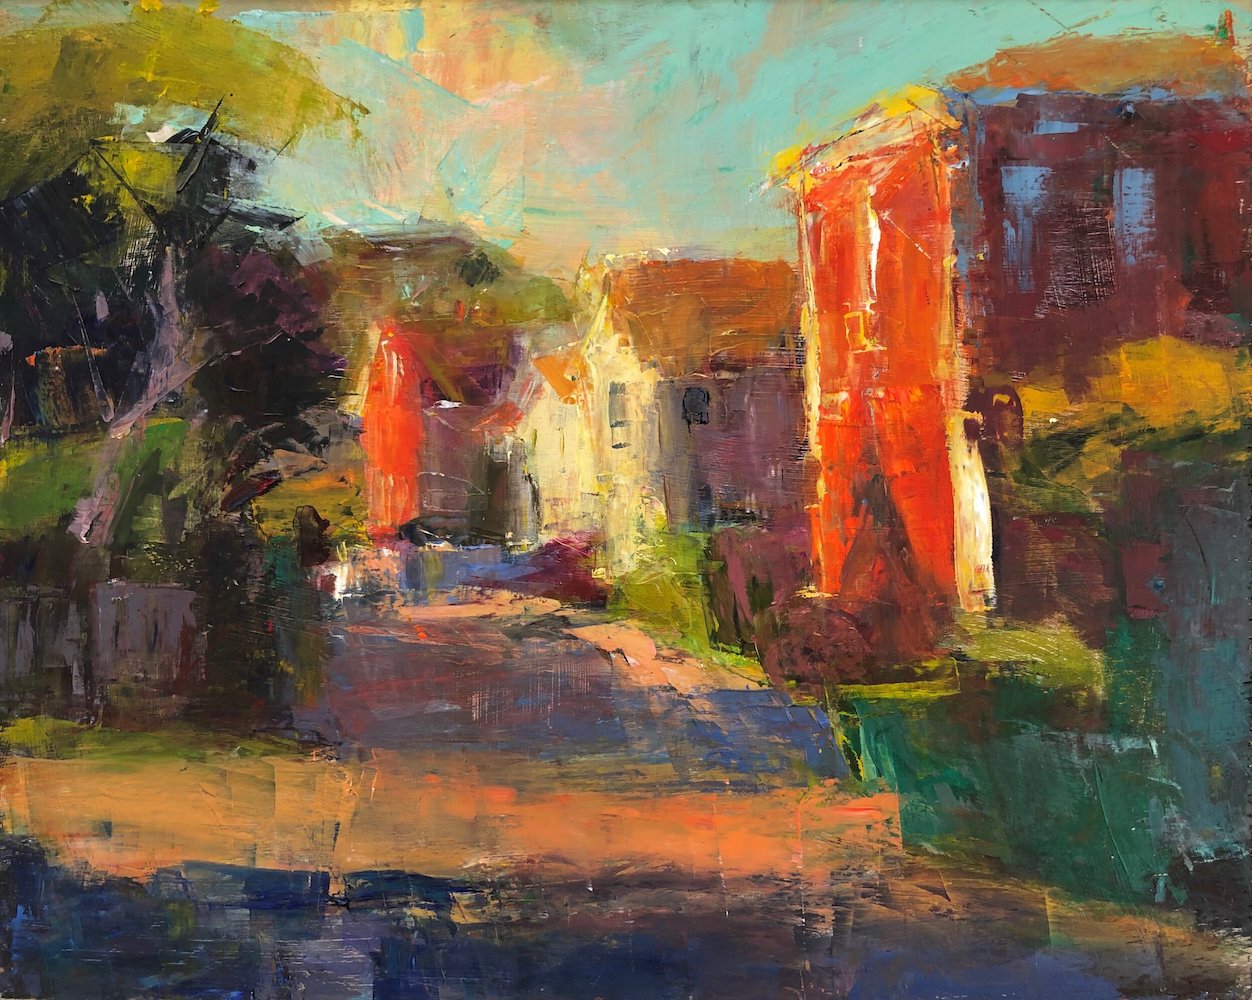 The Sun Smashes Things, Plein Air Oil Painting by Mary Giammarino